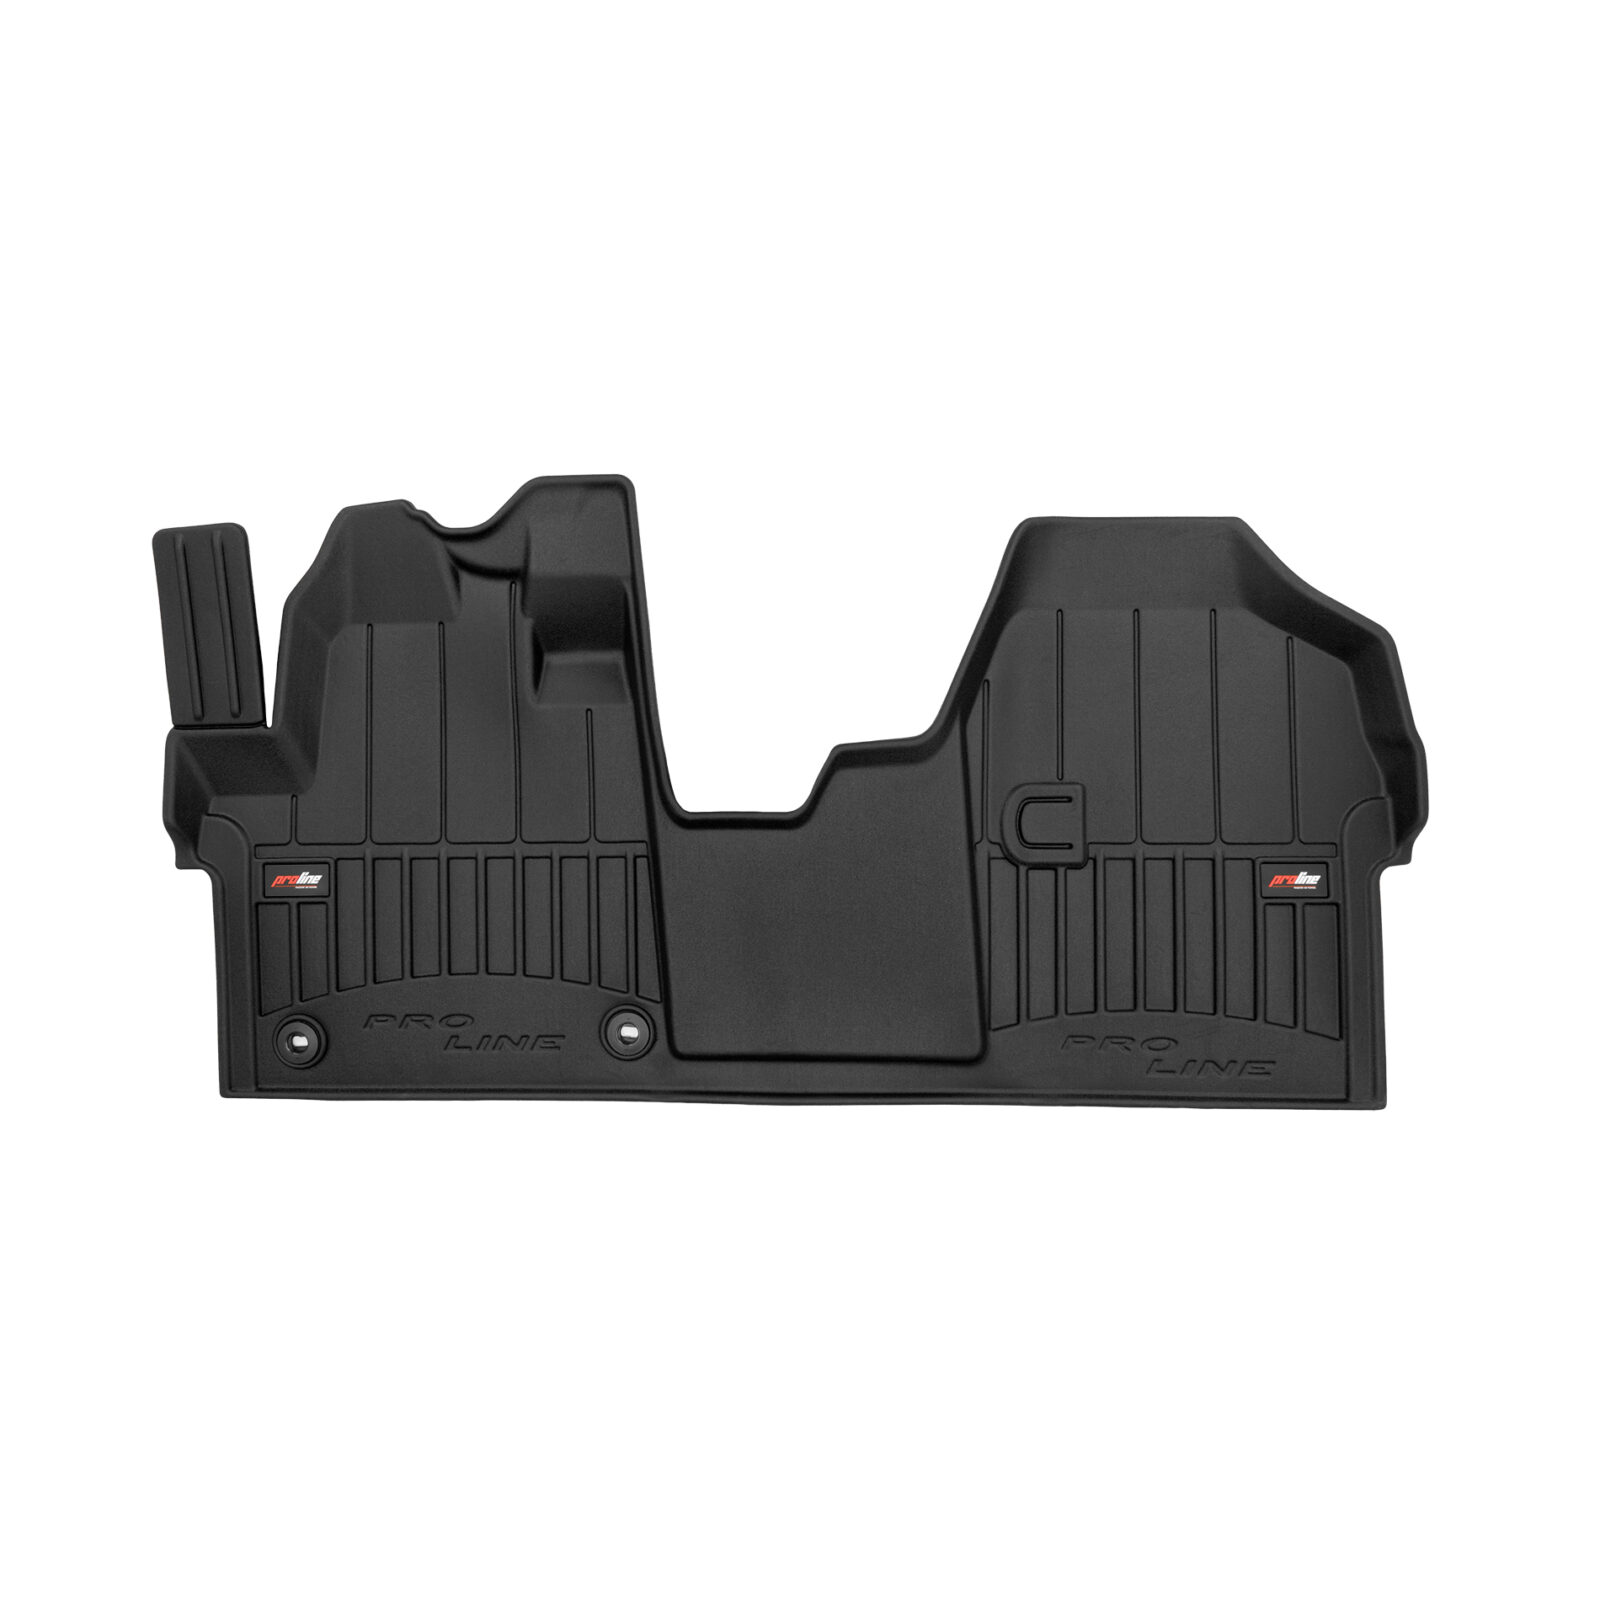 Car mats ProLine tailor-made Toyota II for 2016 Proace since